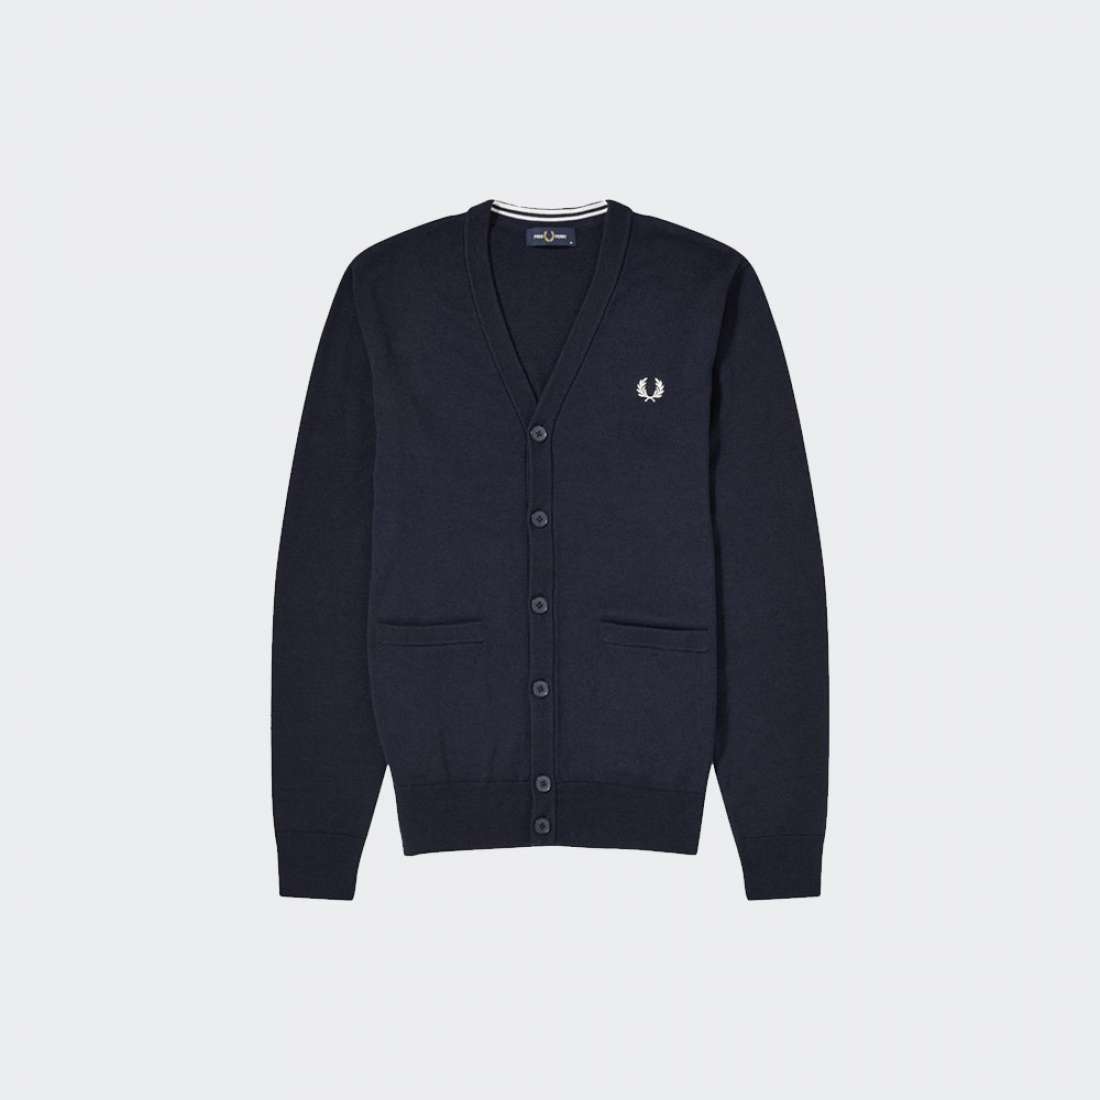 CASACO FRED PERRY K9551-795